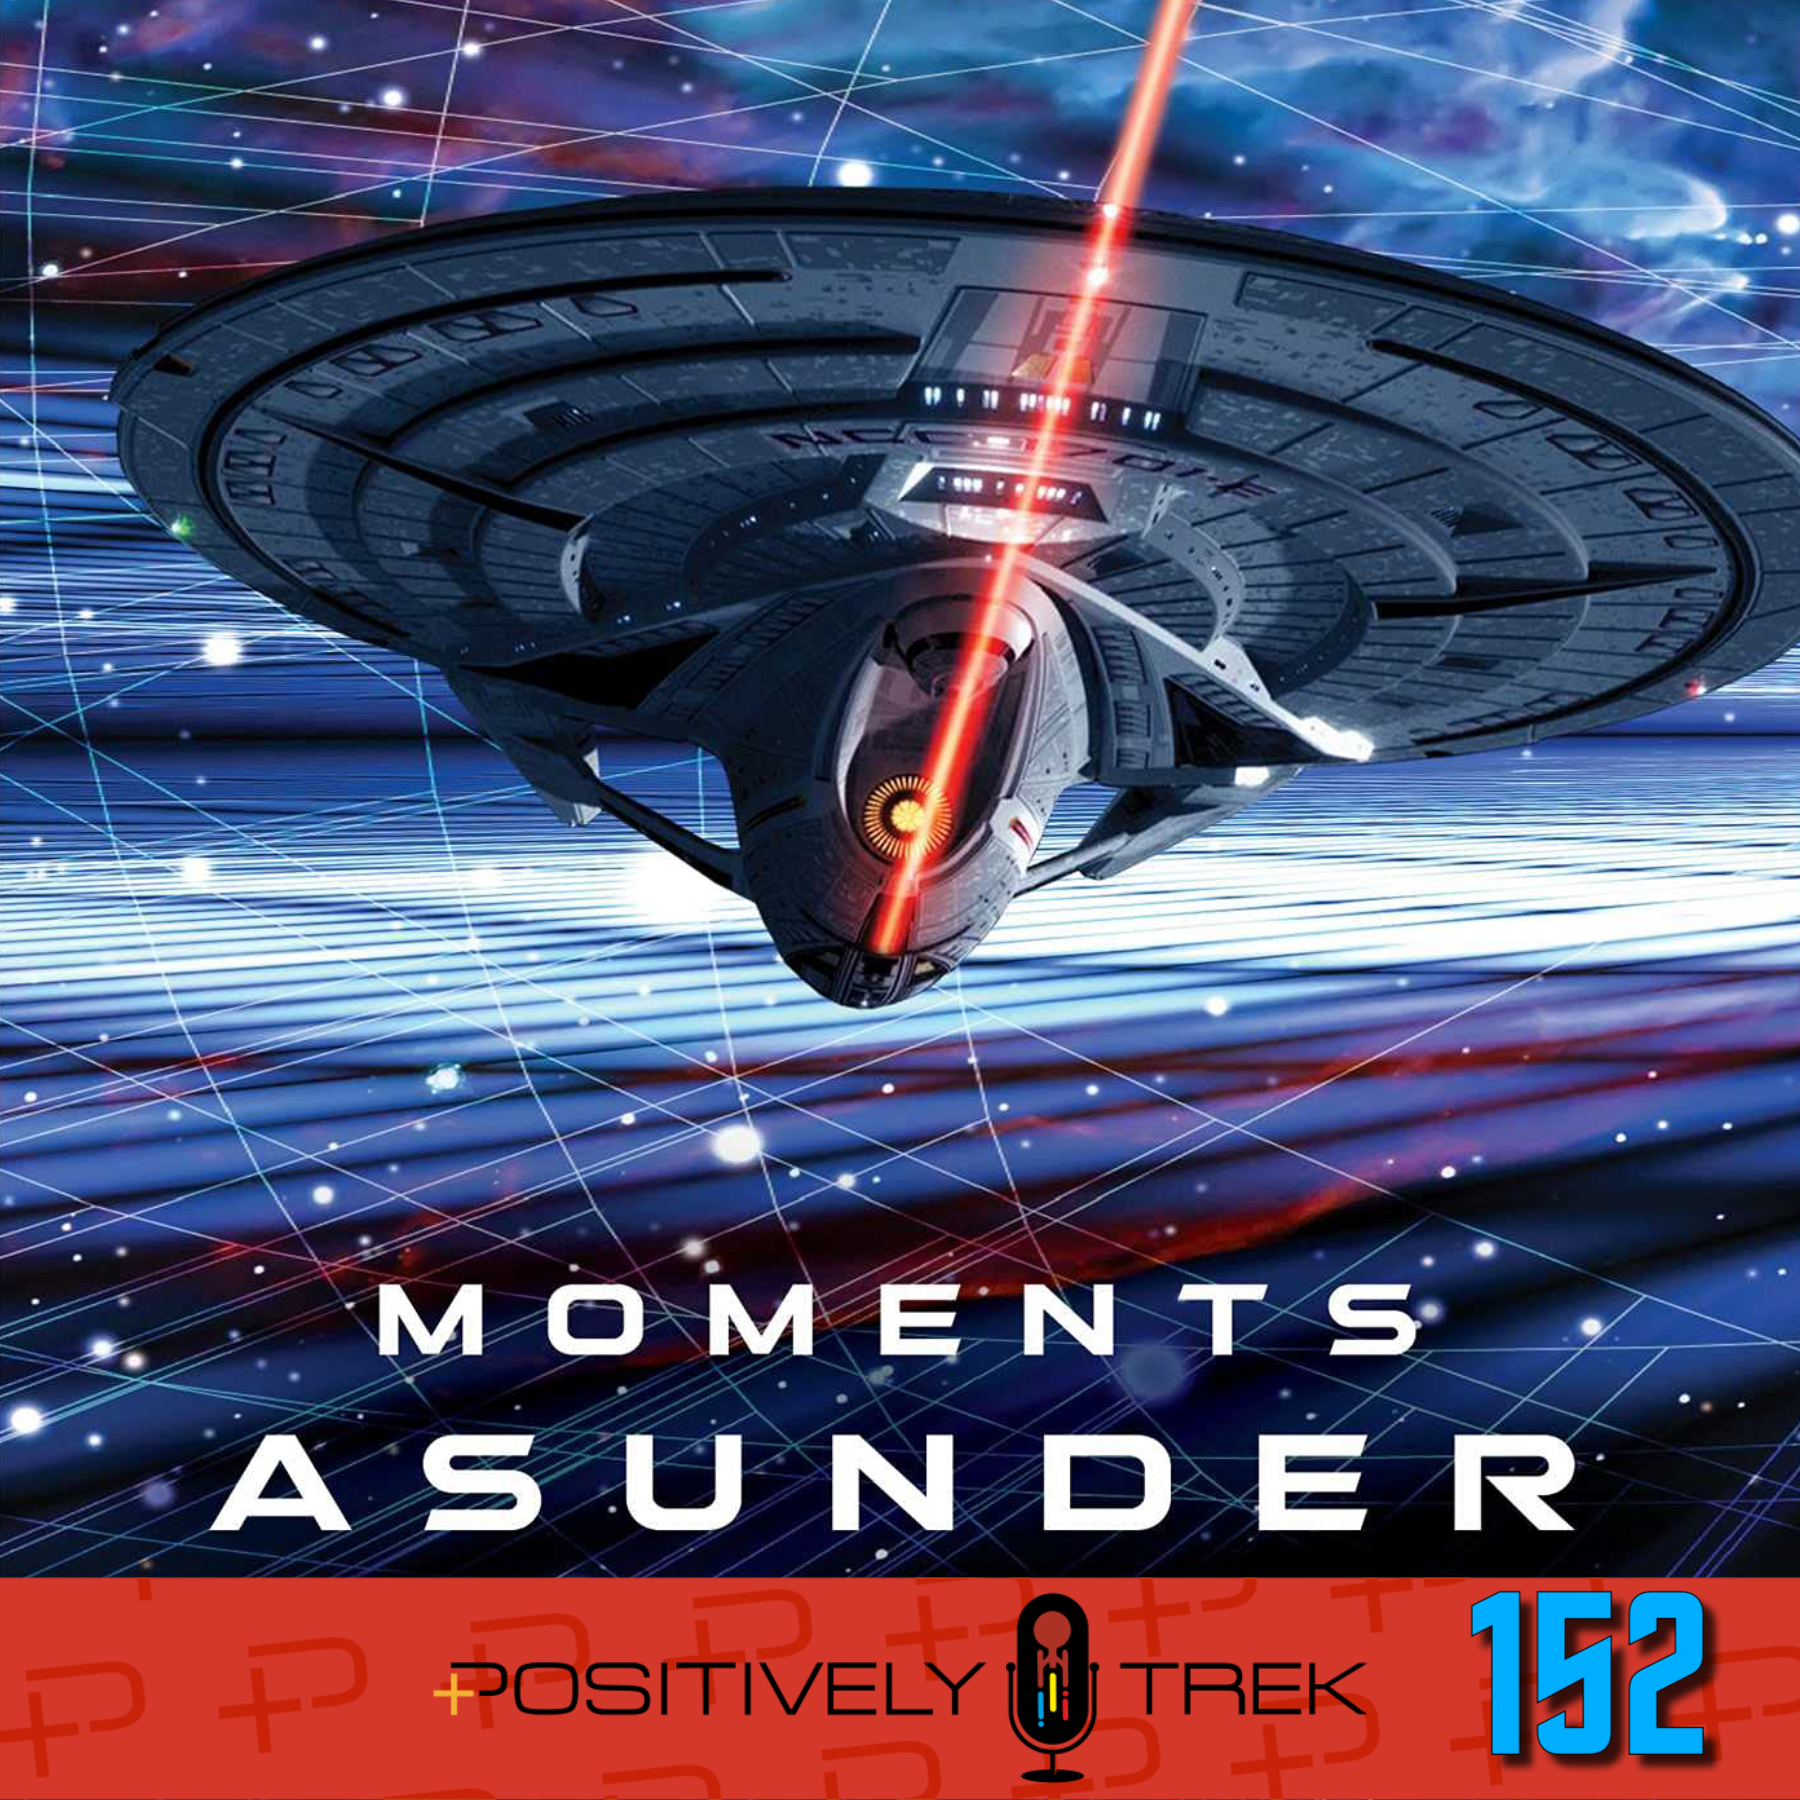 Book Club: Moments Asunder with Special Guest Dayton Ward!